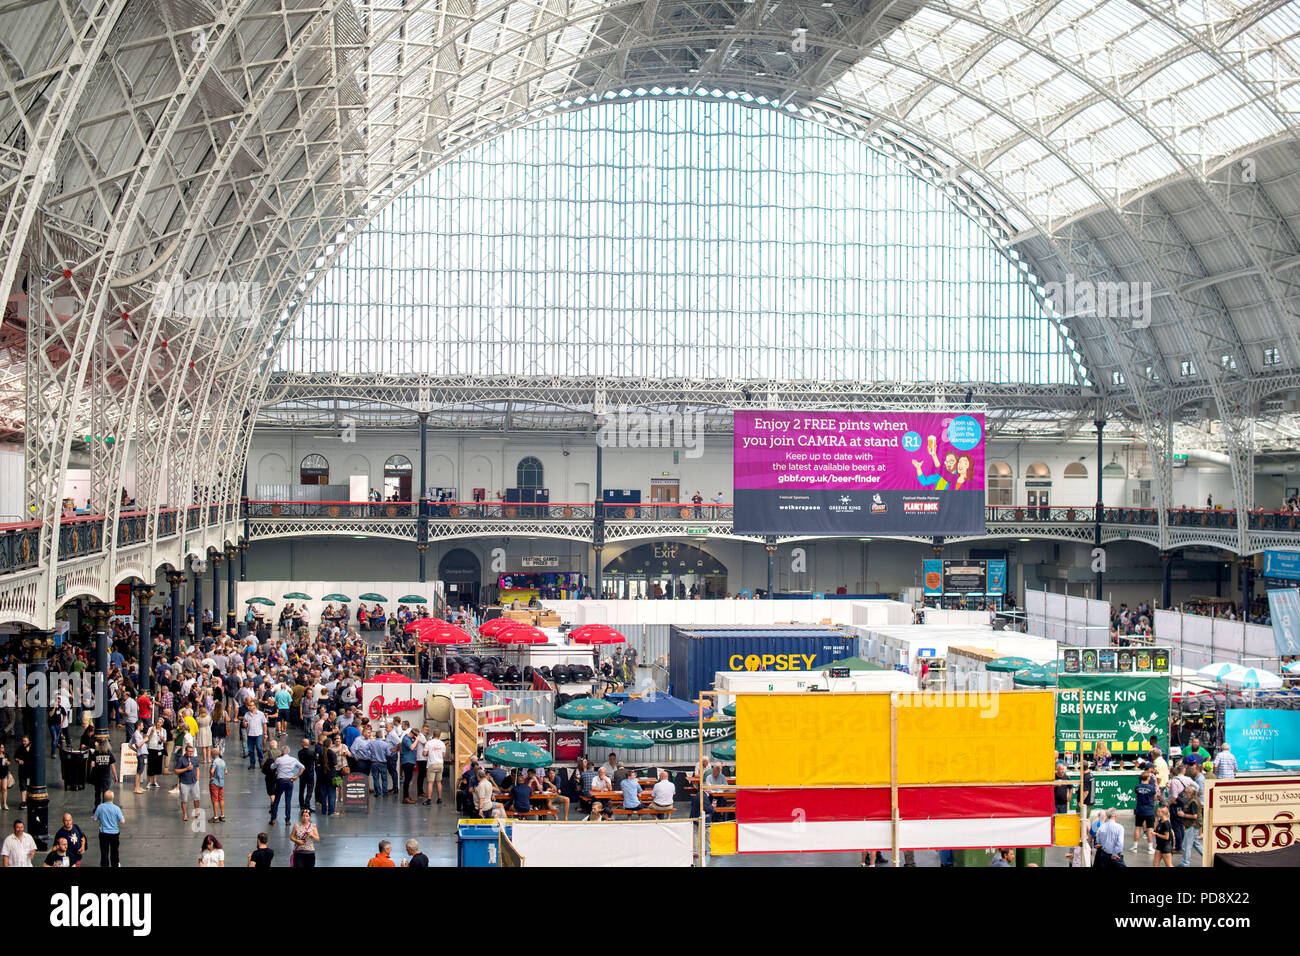 A view of the CAMRA Great British Beer Festival at Olympia in London, to sample craft beers and real ales from around the world. Stock Photo